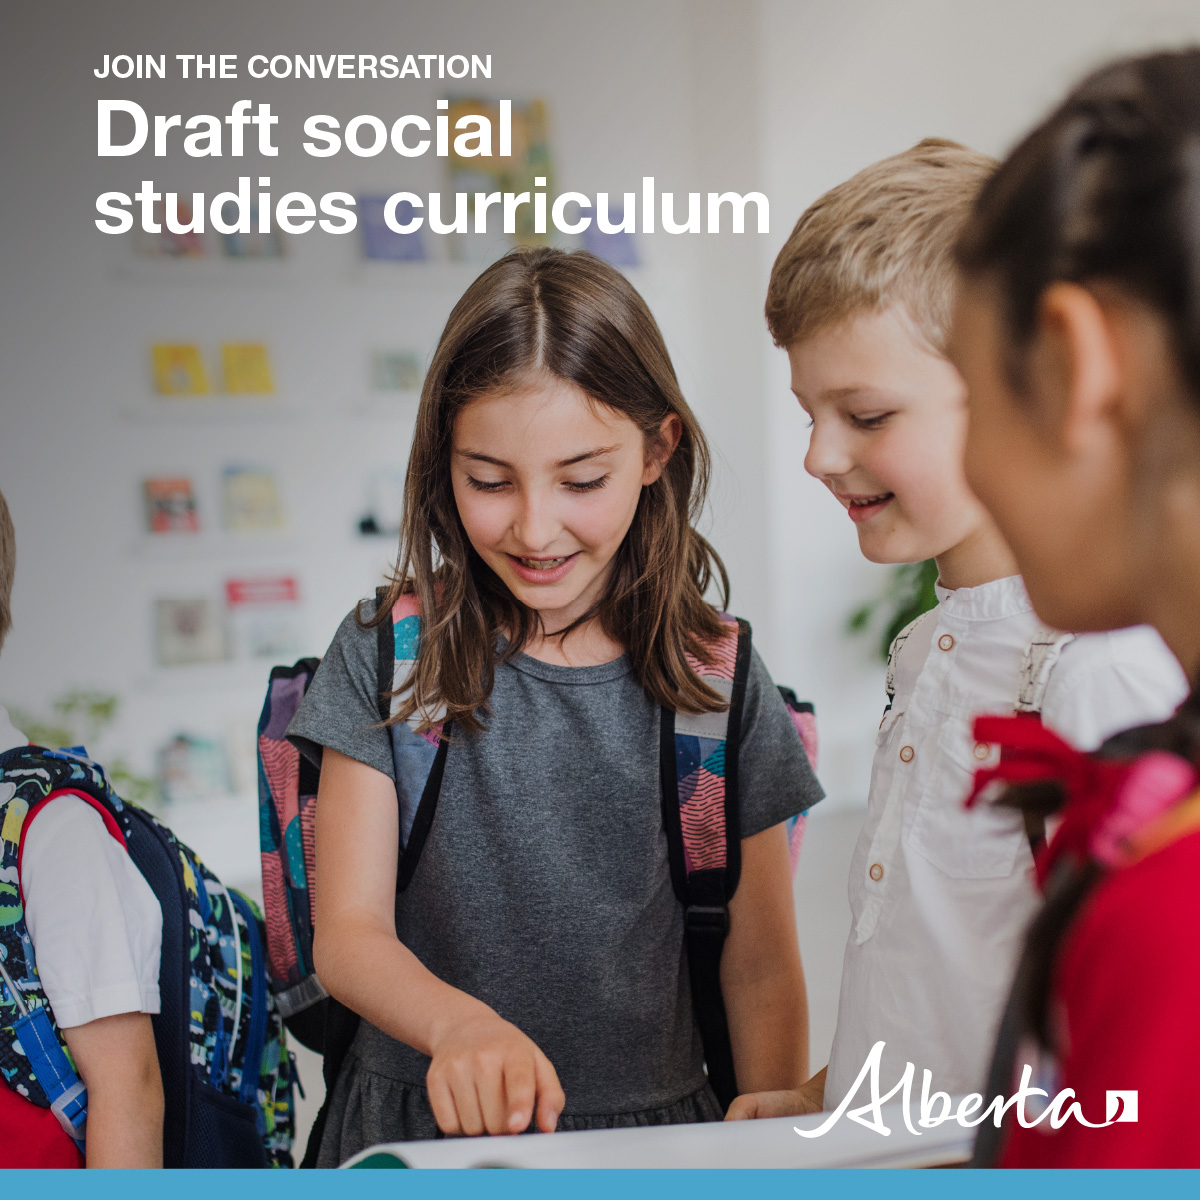 There’s still time to provide input on key learnings in the new #AbEd draft social studies curriculum! Have your say by completing the feedback form at alberta.ca/curriculum-hav… by April 2.